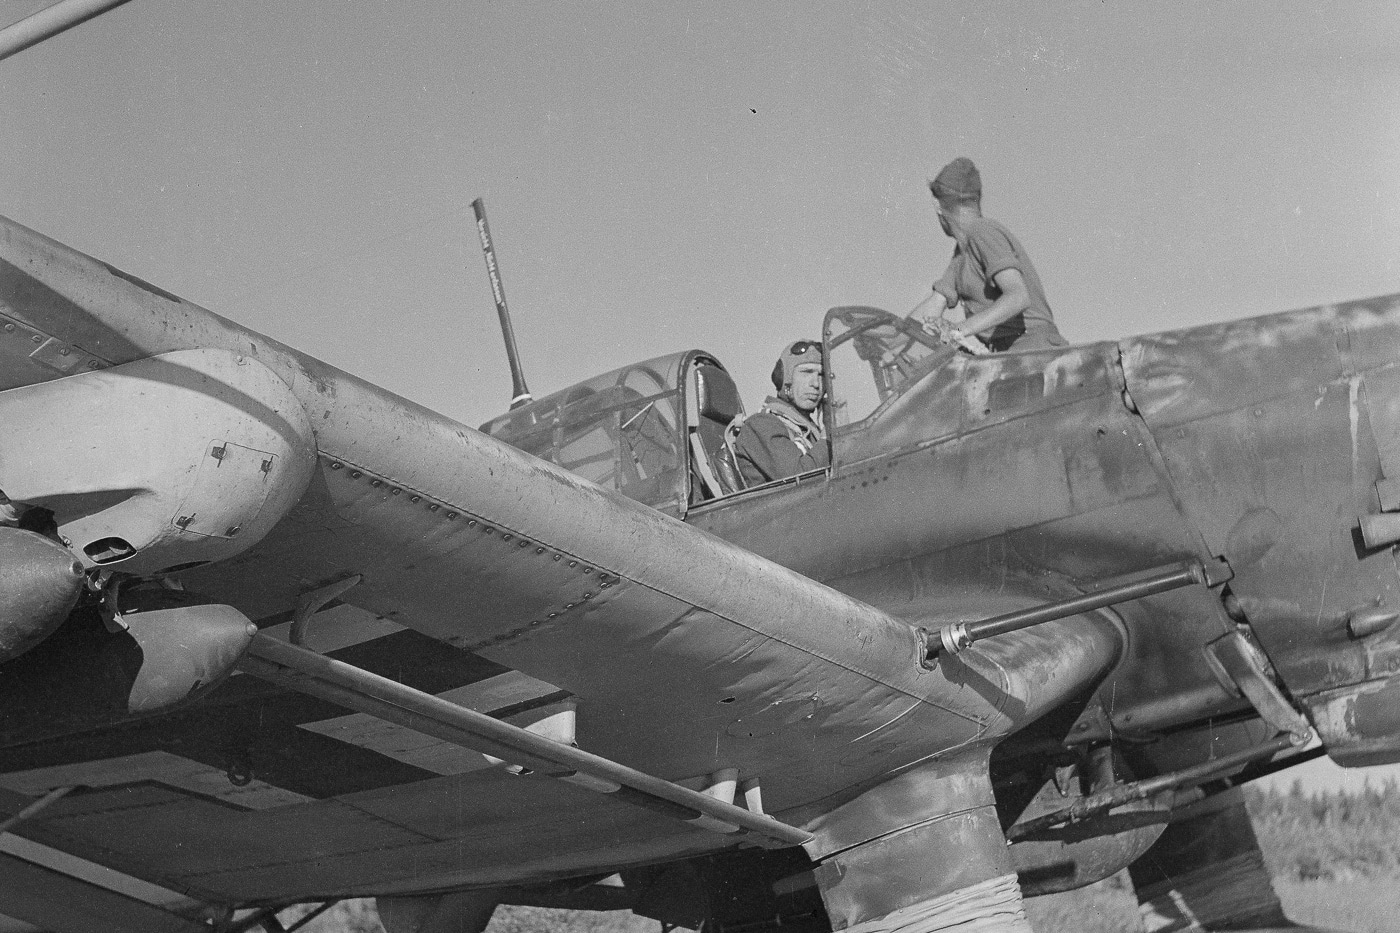 In this black and white photograph, we see a pilot prepare his Junker Ju 87D for take off in the Continuation War. The Continuation War, also known as the Second Soviet-Finnish War, was a conflict fought by Finland and Nazi Germany against the Soviet Union during World War II.